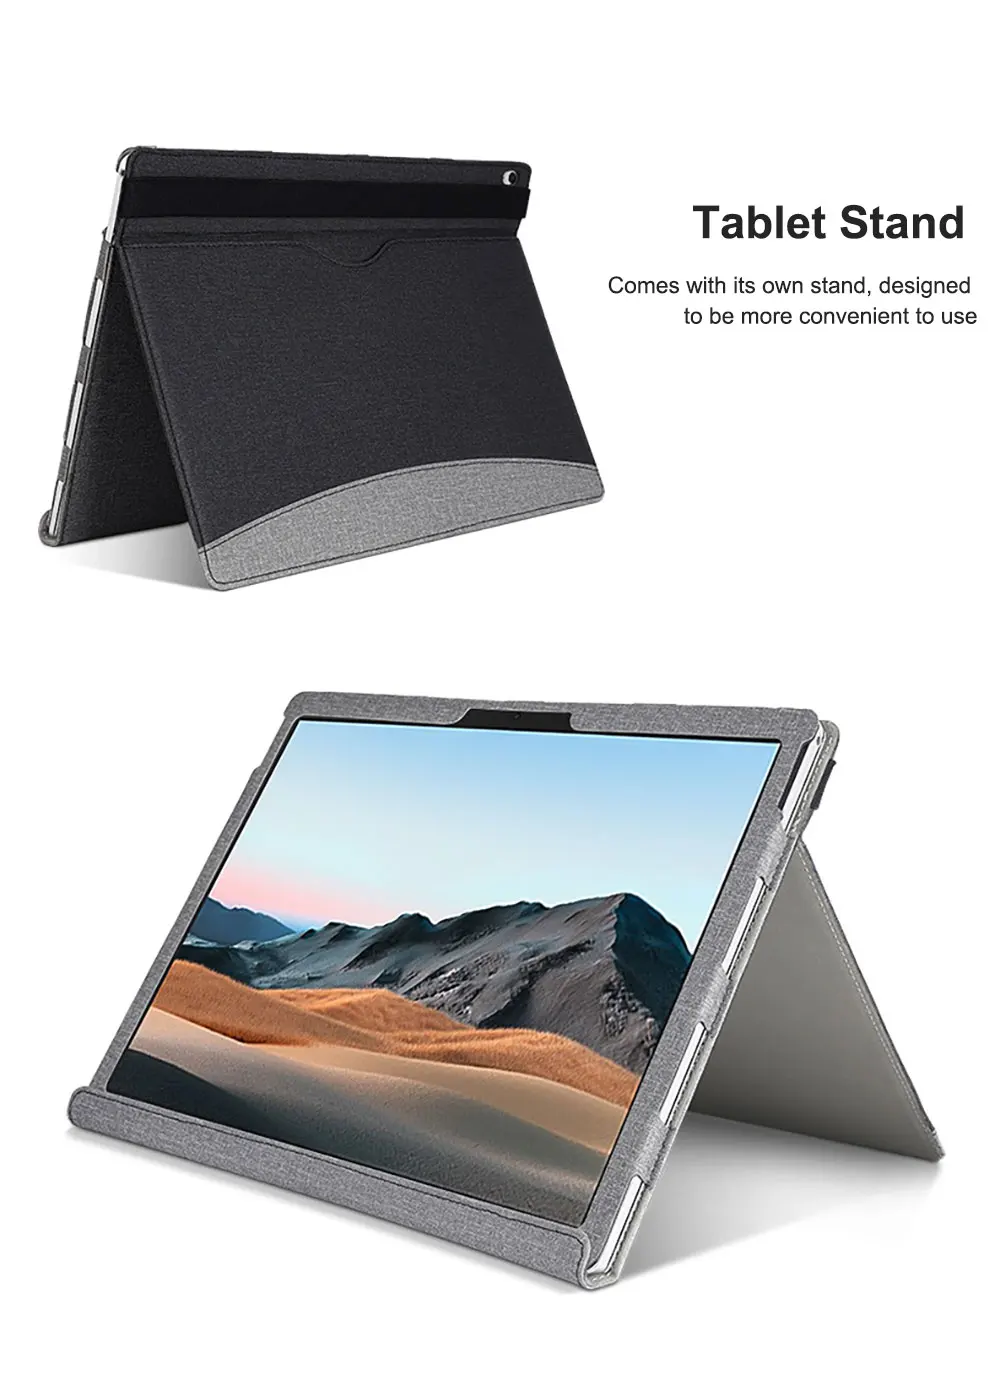 Leather Tablet Cover For Surface Book 1 2 3 13.5 Inch Simple Business Case Protective Anti Fall Adjustable Holder Pbk207 Laudtec details